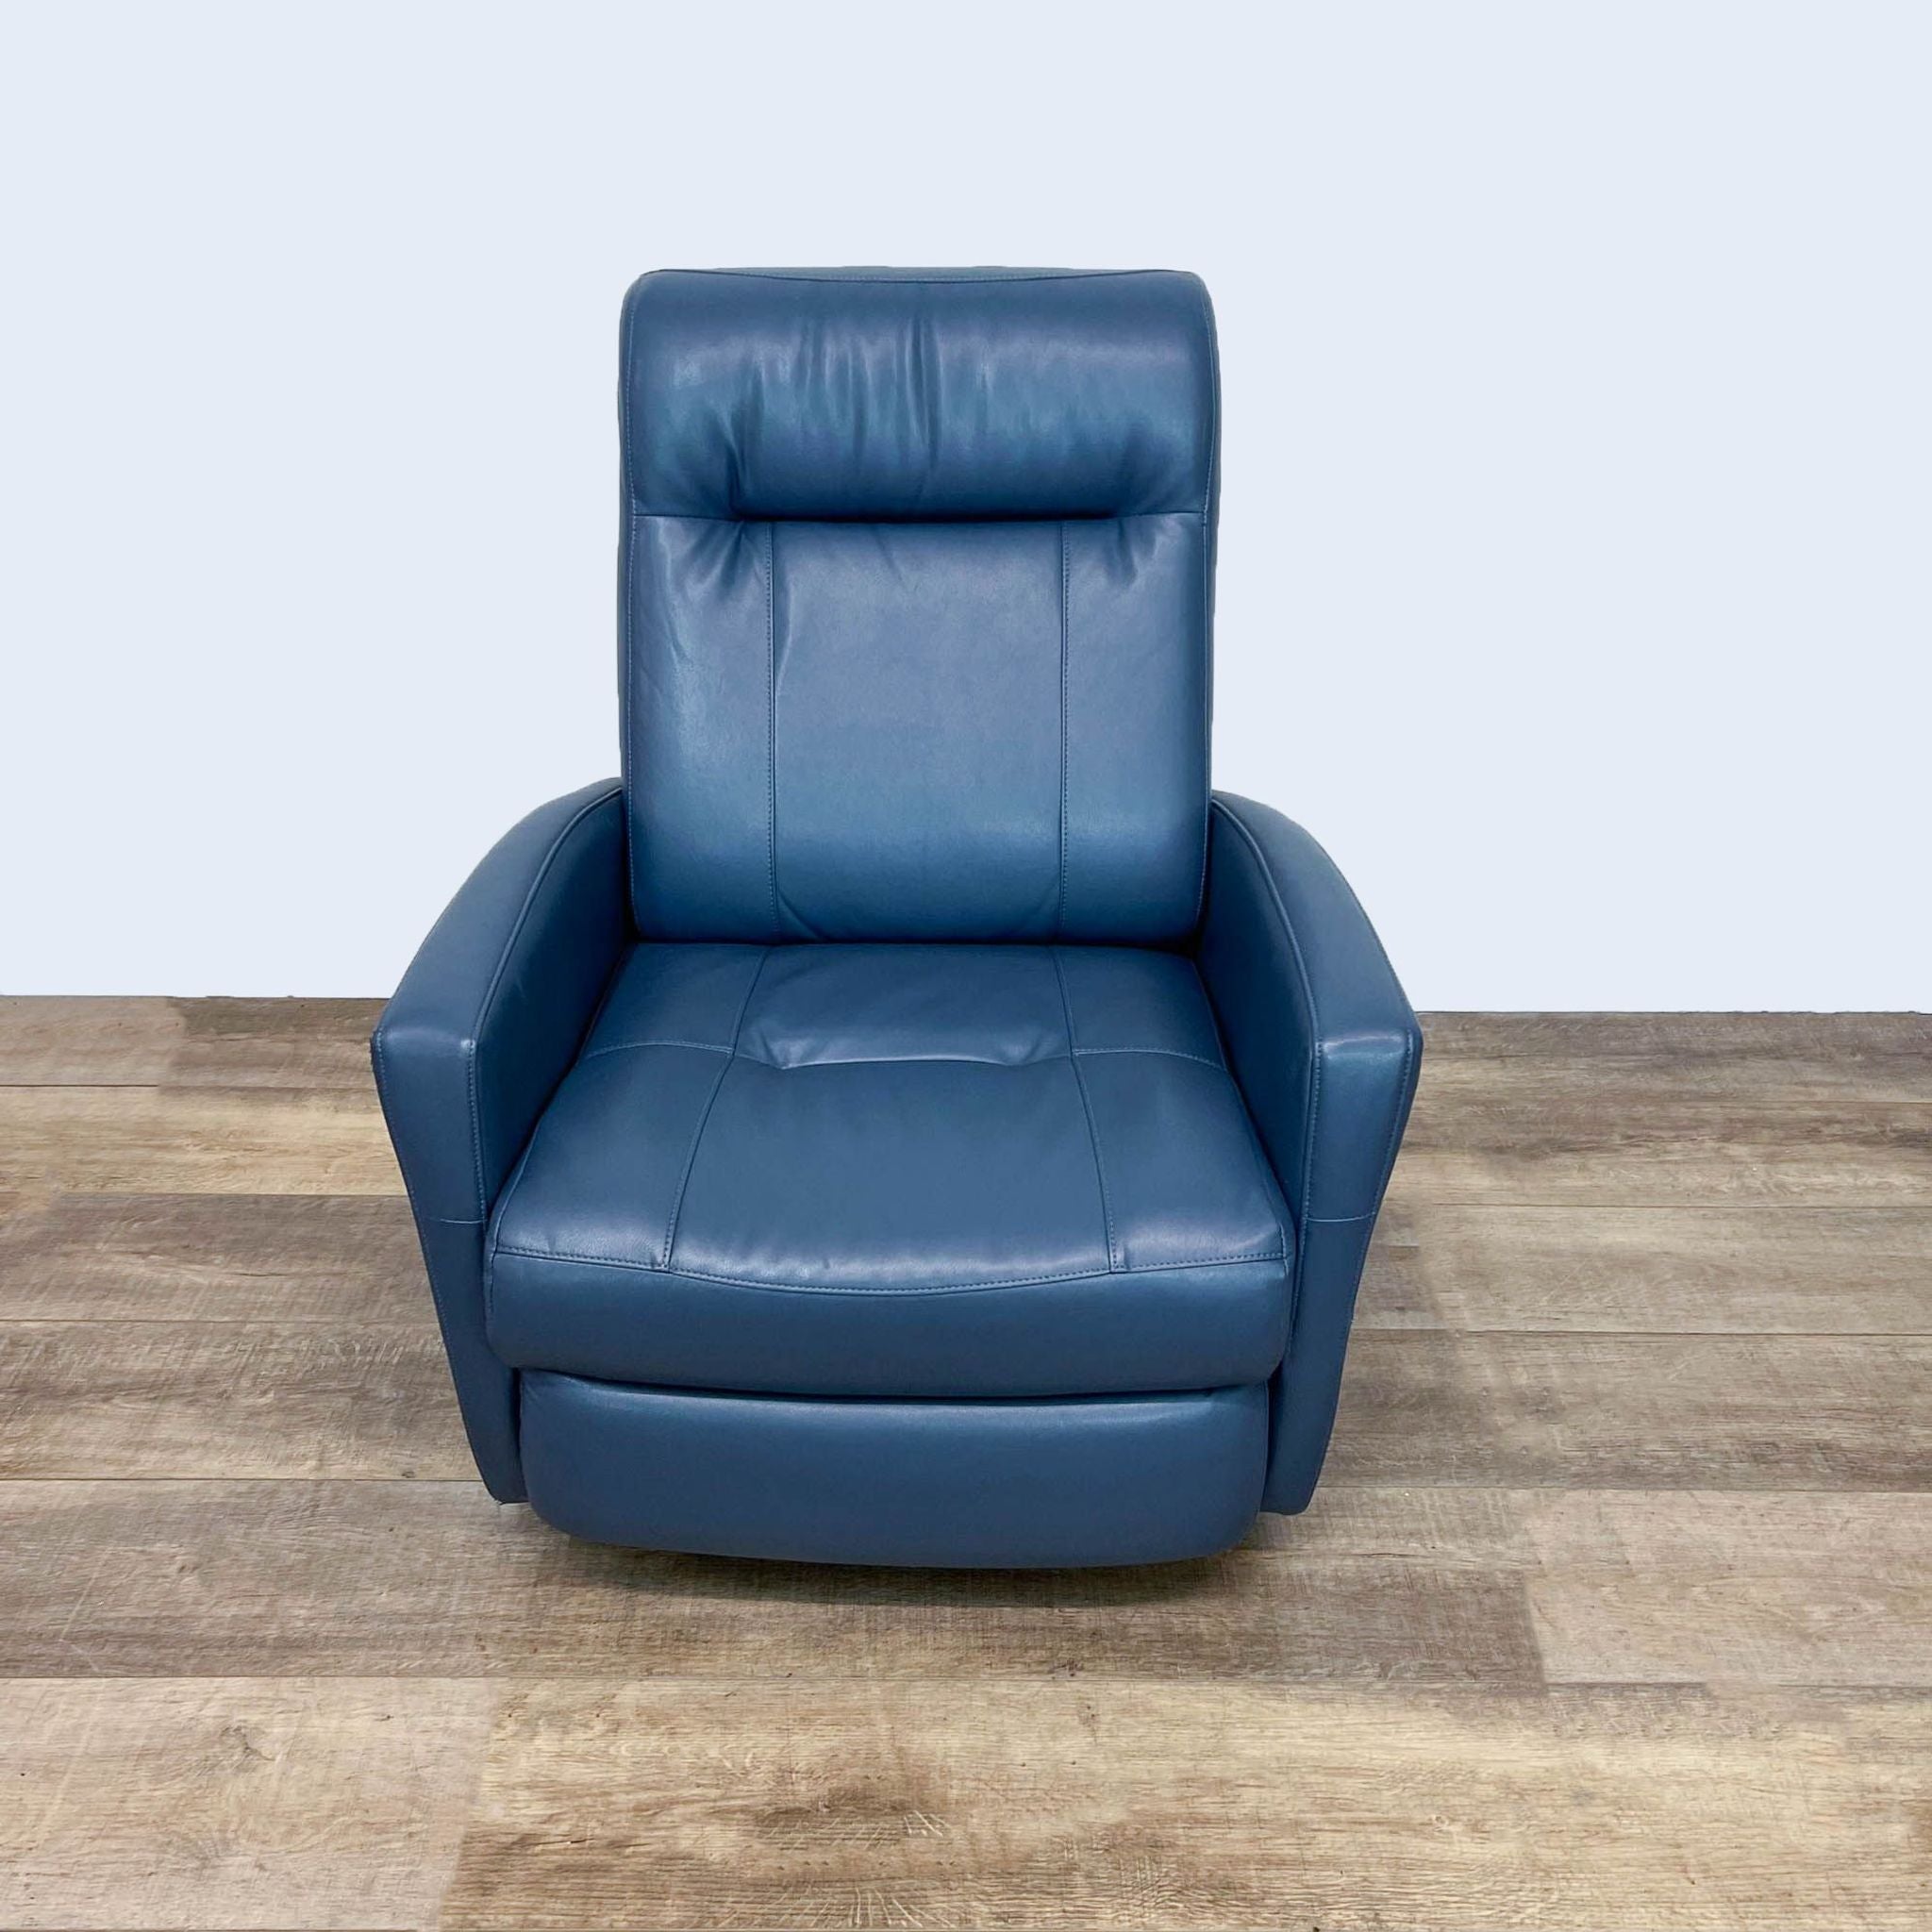 Reperch brand leather recliner with tufting and swivel base in upright position against a wooden floor and white backdrop.